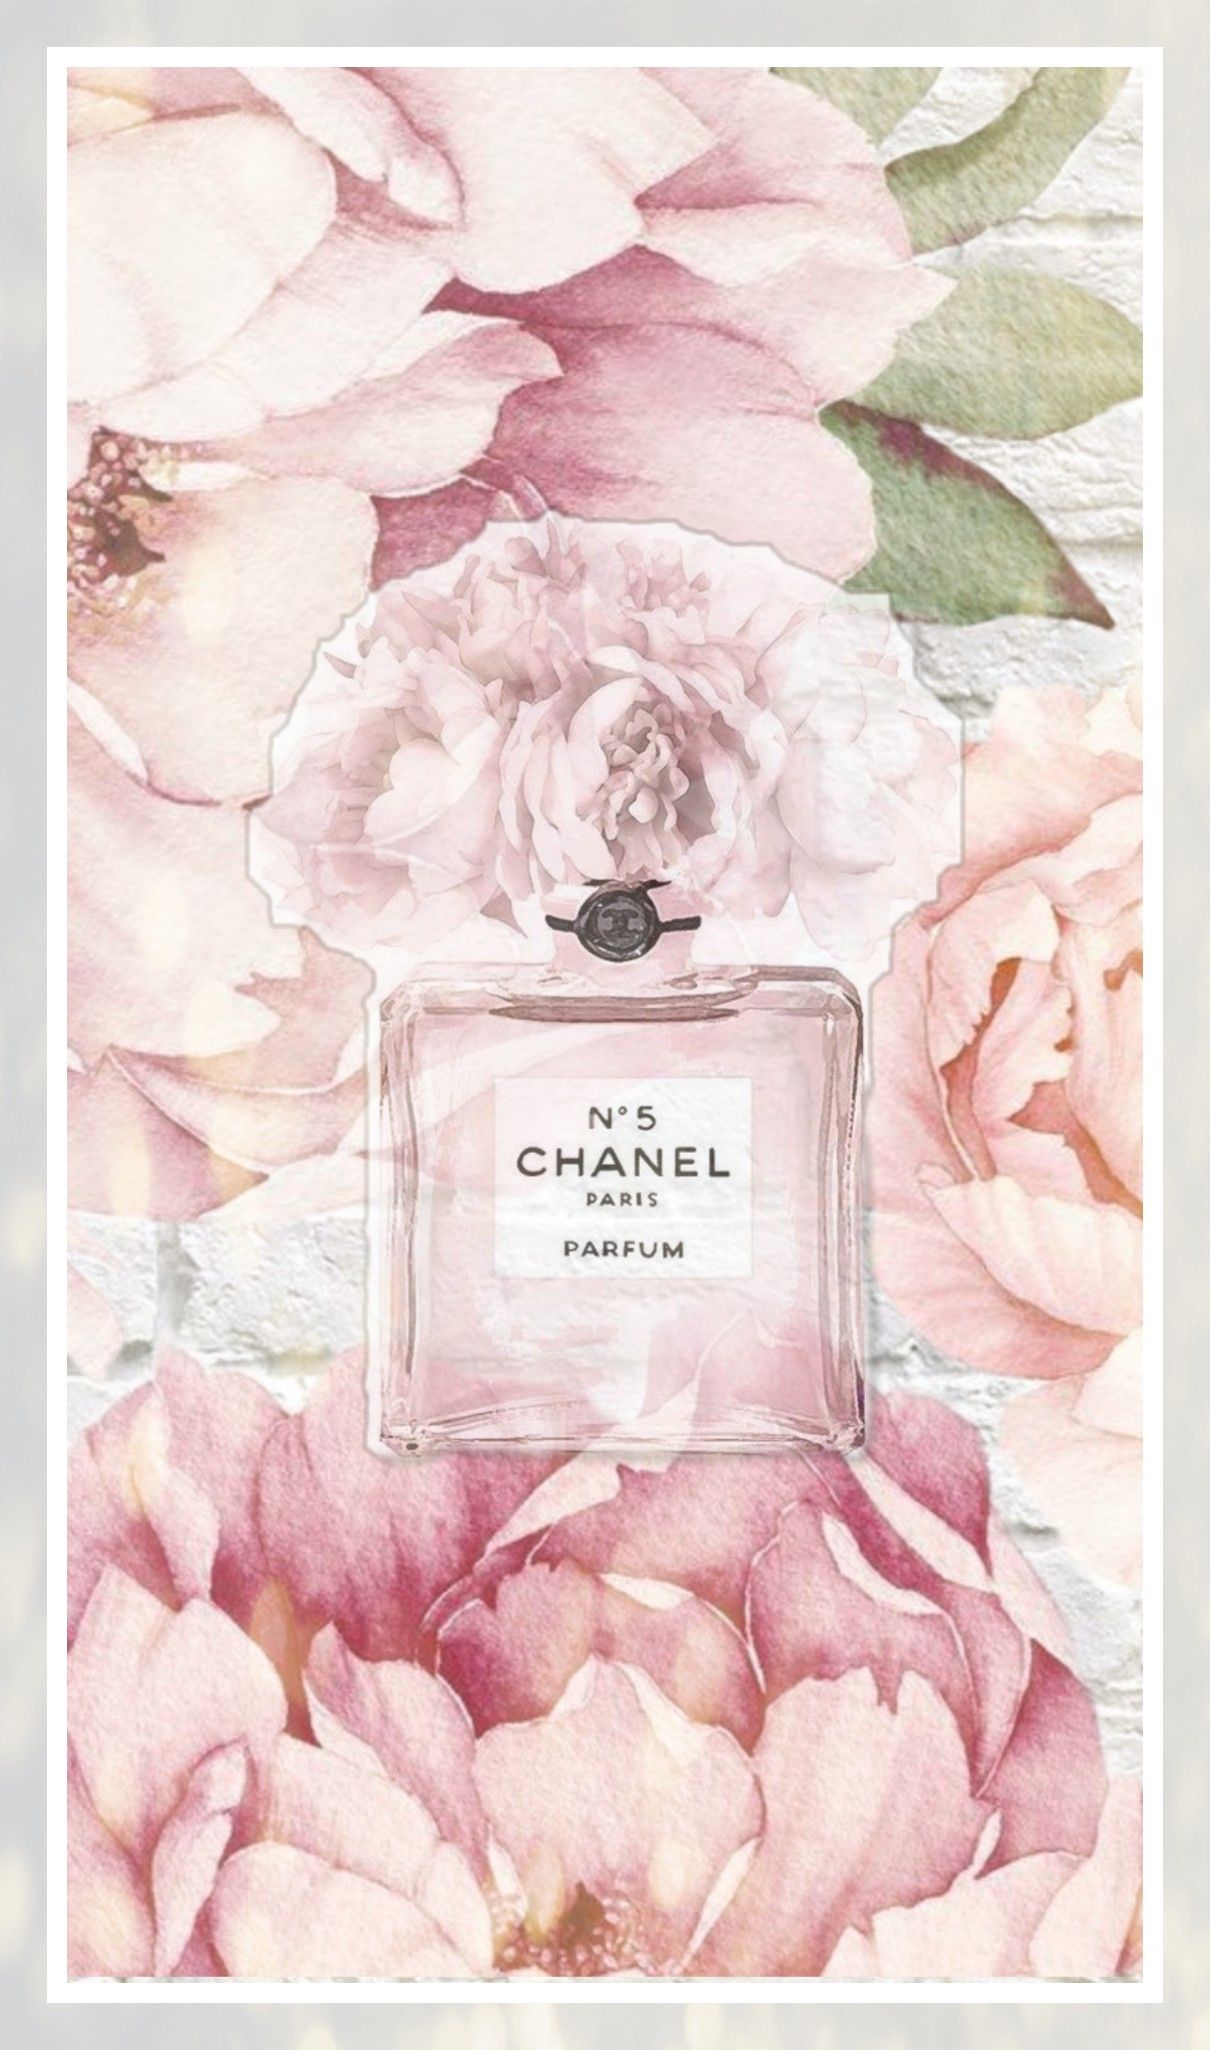 Chanel Floral Wallpapers - 4k, HD Chanel Floral Backgrounds on WallpaperBat